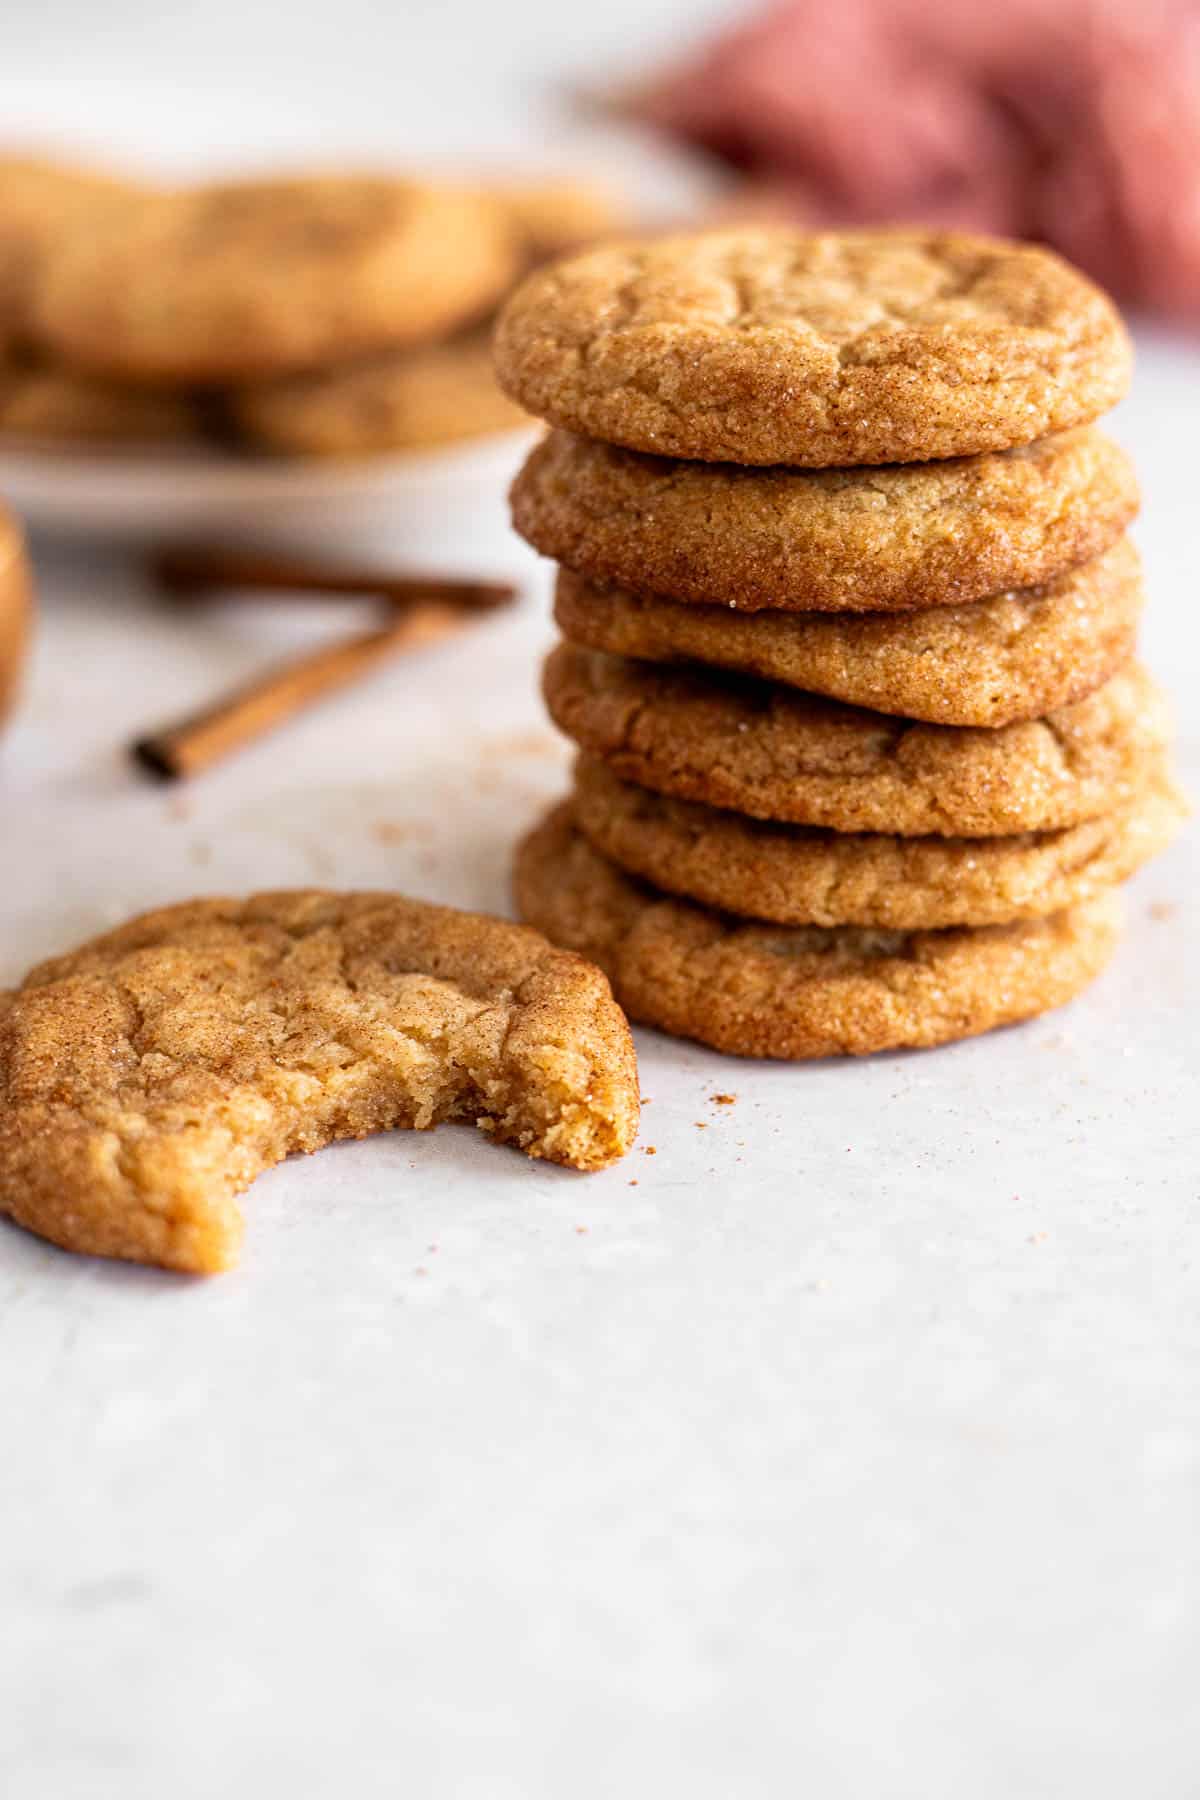 brown butter snickerdoodles stacked next to a cookie with a bite in it.